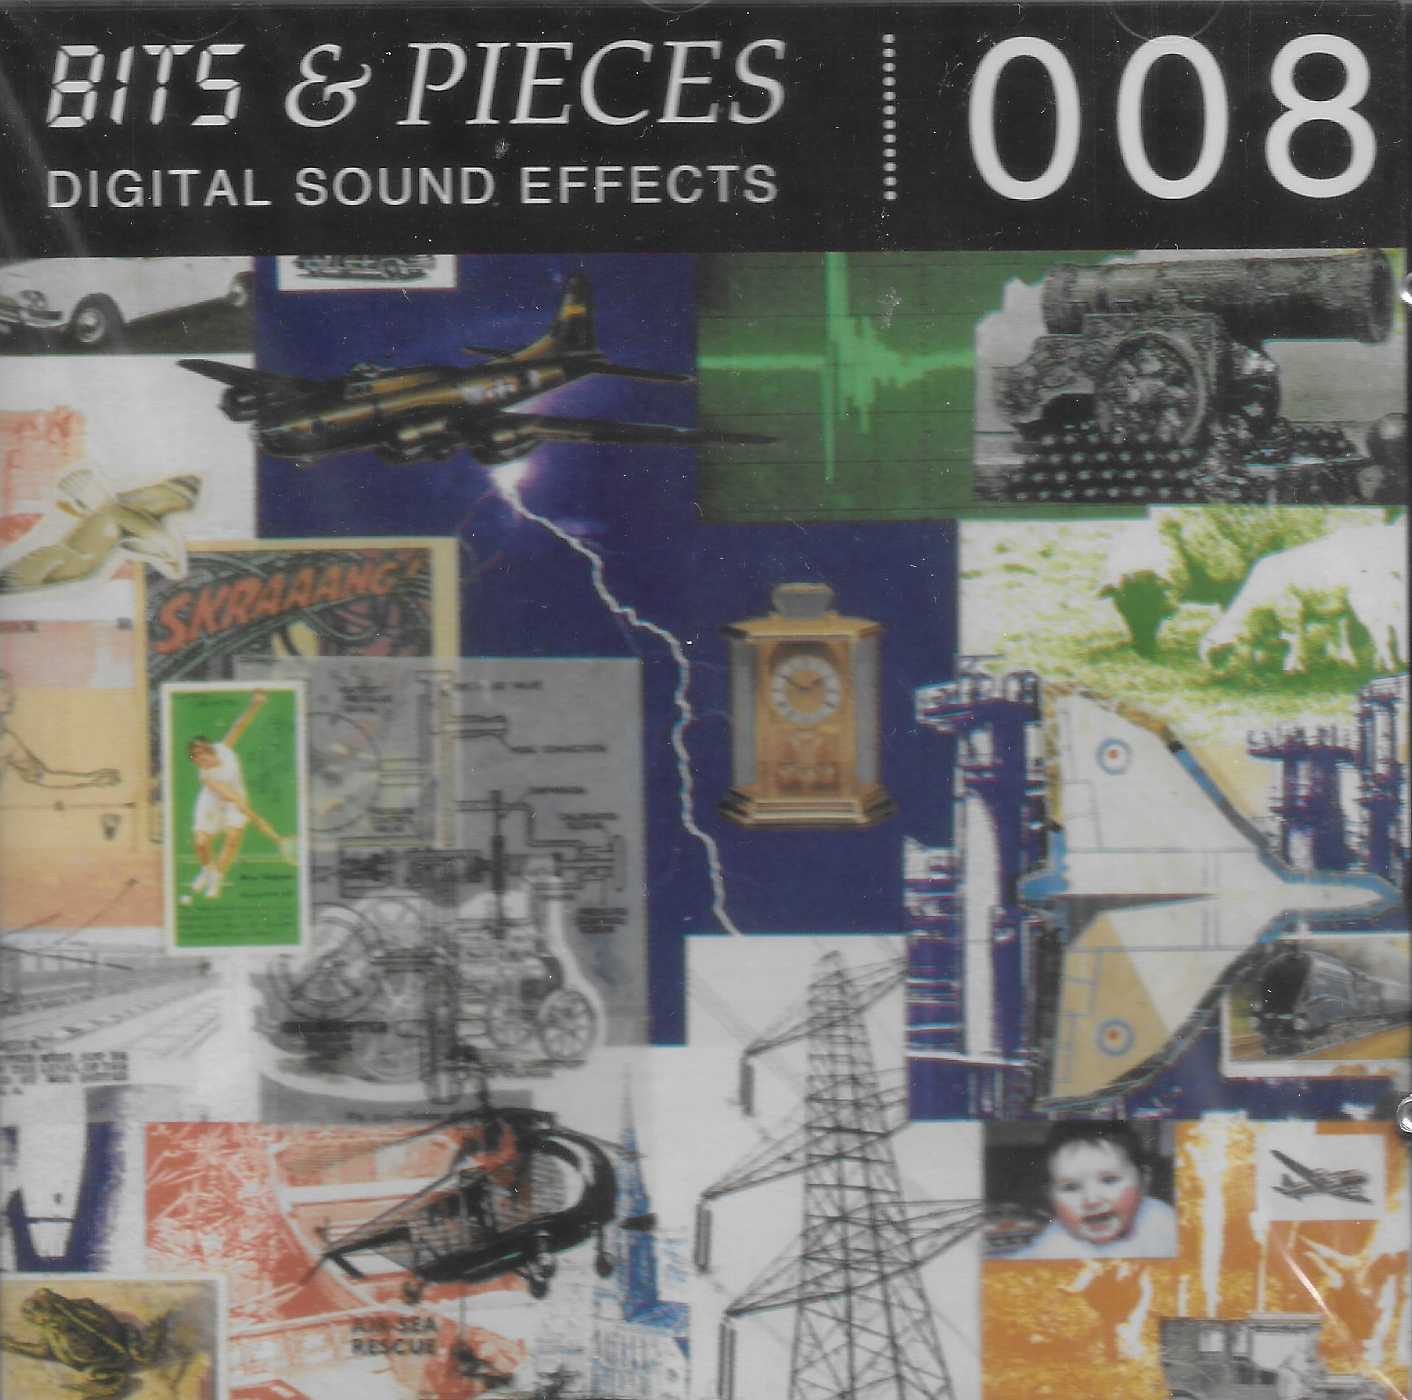 Picture of BITS 008 Bits & pieces digital sound effects 008 by artist Various from ITV, Channel 4 and Channel 5 cds library